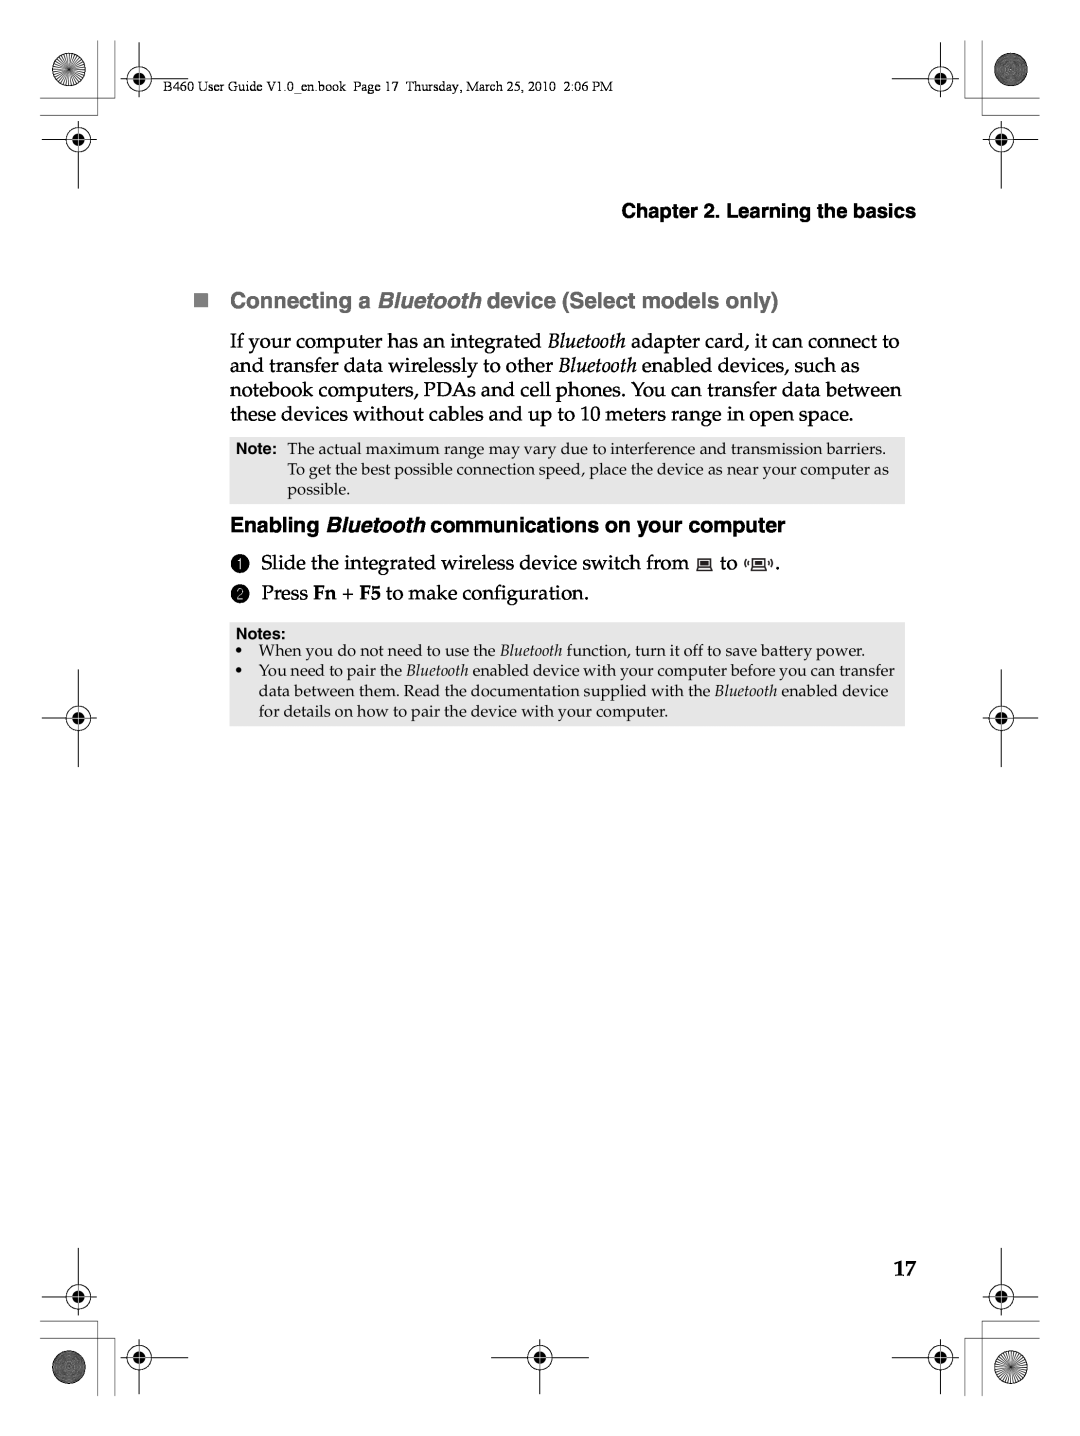 Lenovo B460 manual „ Connecting a Bluetooth device Select models only, Enabling Bluetooth communications on your computer 